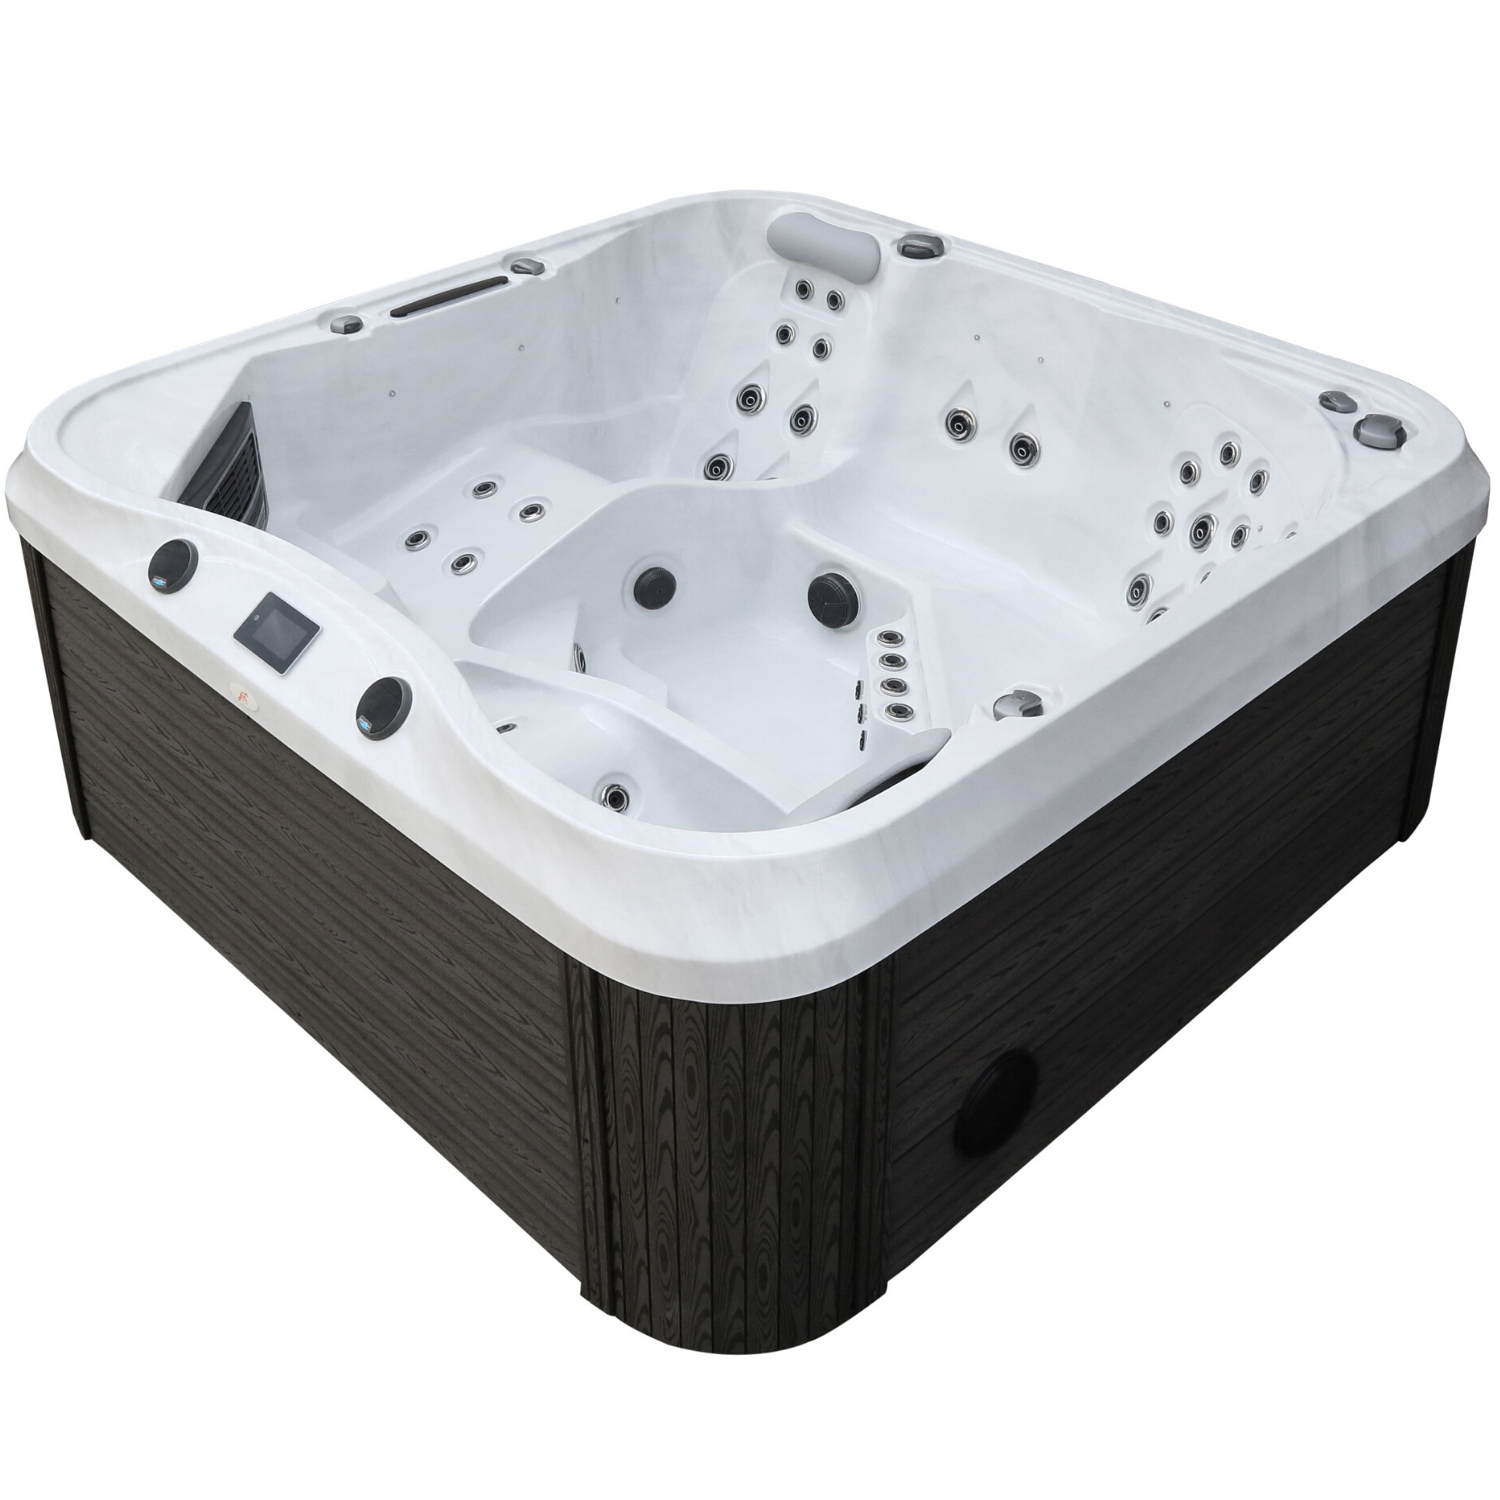 The Lugna hot tub by Just Hot Tubs